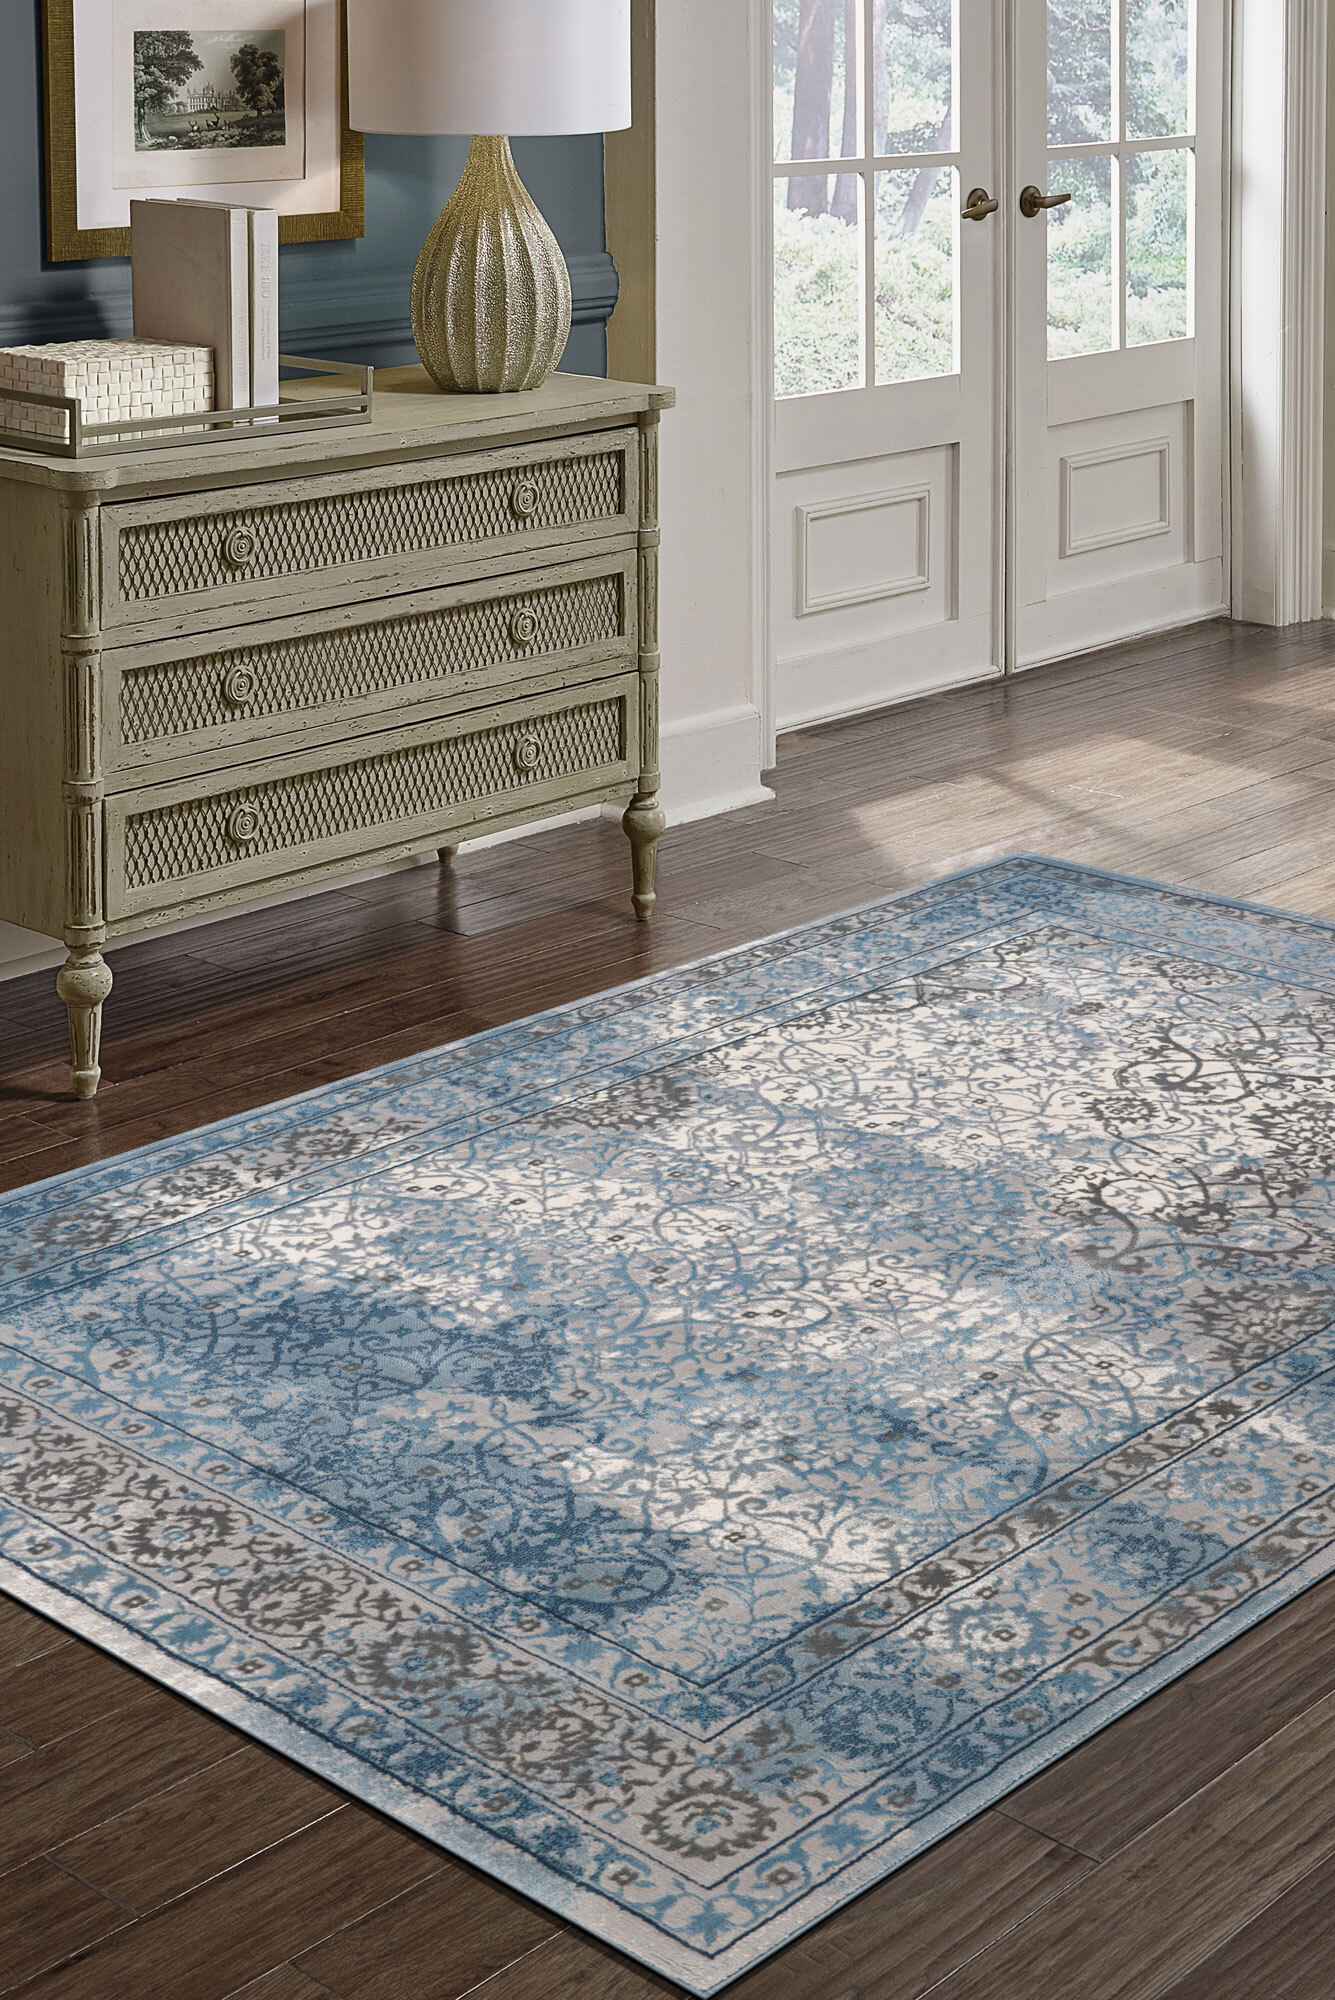 Kyra Transitional Floral Rug(Size 170 x 120cm)